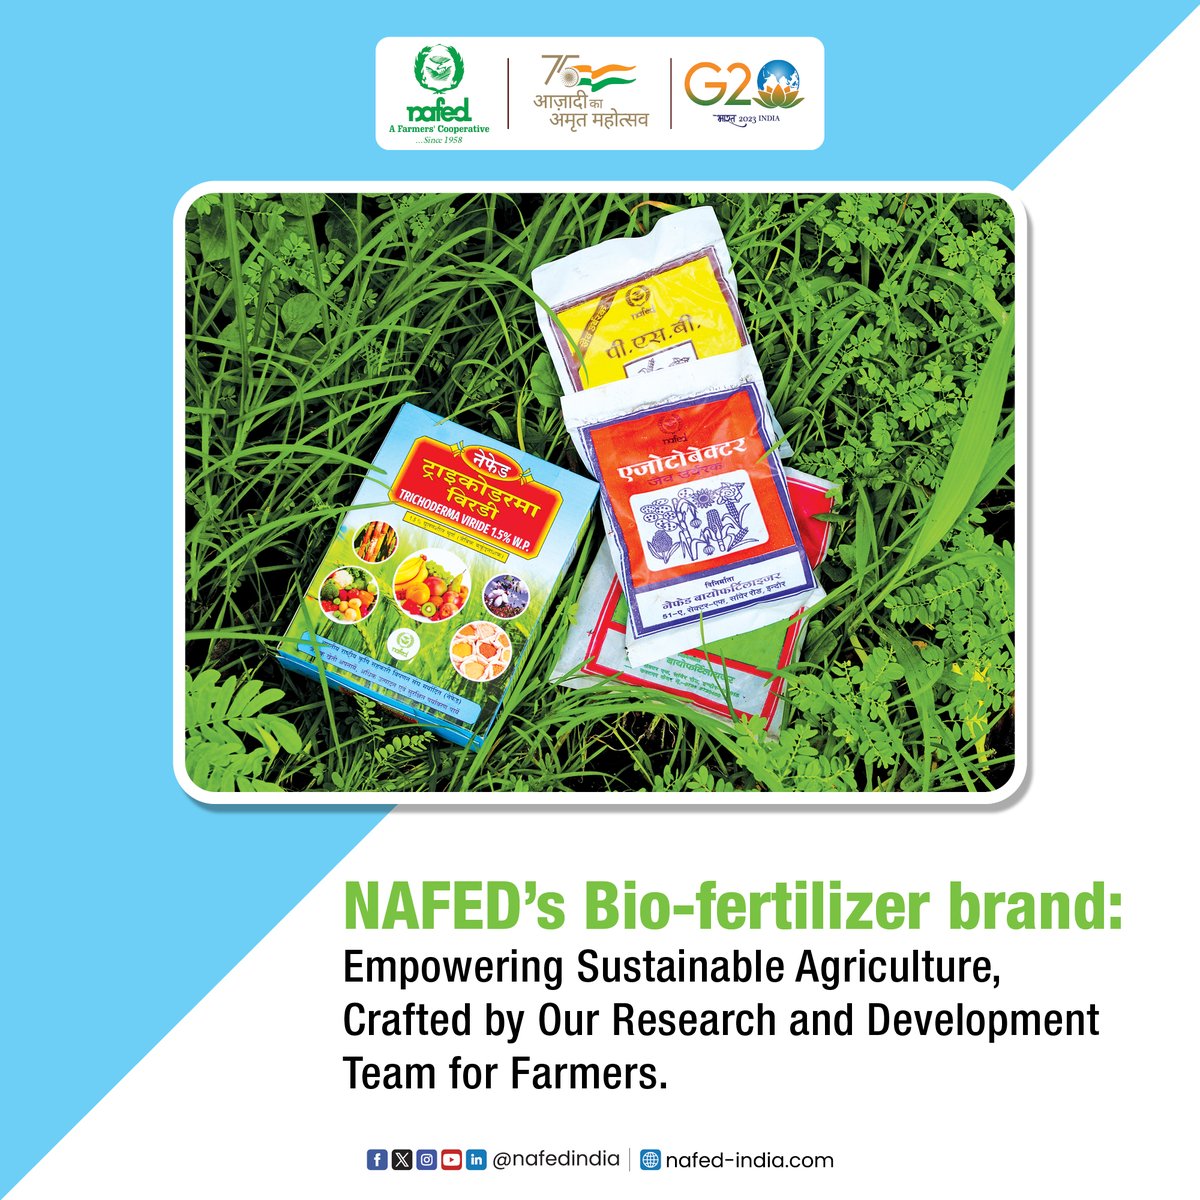 NAFED Biofertilizers has been honored not once, not twice, but an incredible 11 times by the National Productivity Council (Government of India) for our outstanding contributions to agriculture.
#agricultureindia #cooperativefarming #indianfarmers #EmpoweringCooperatives